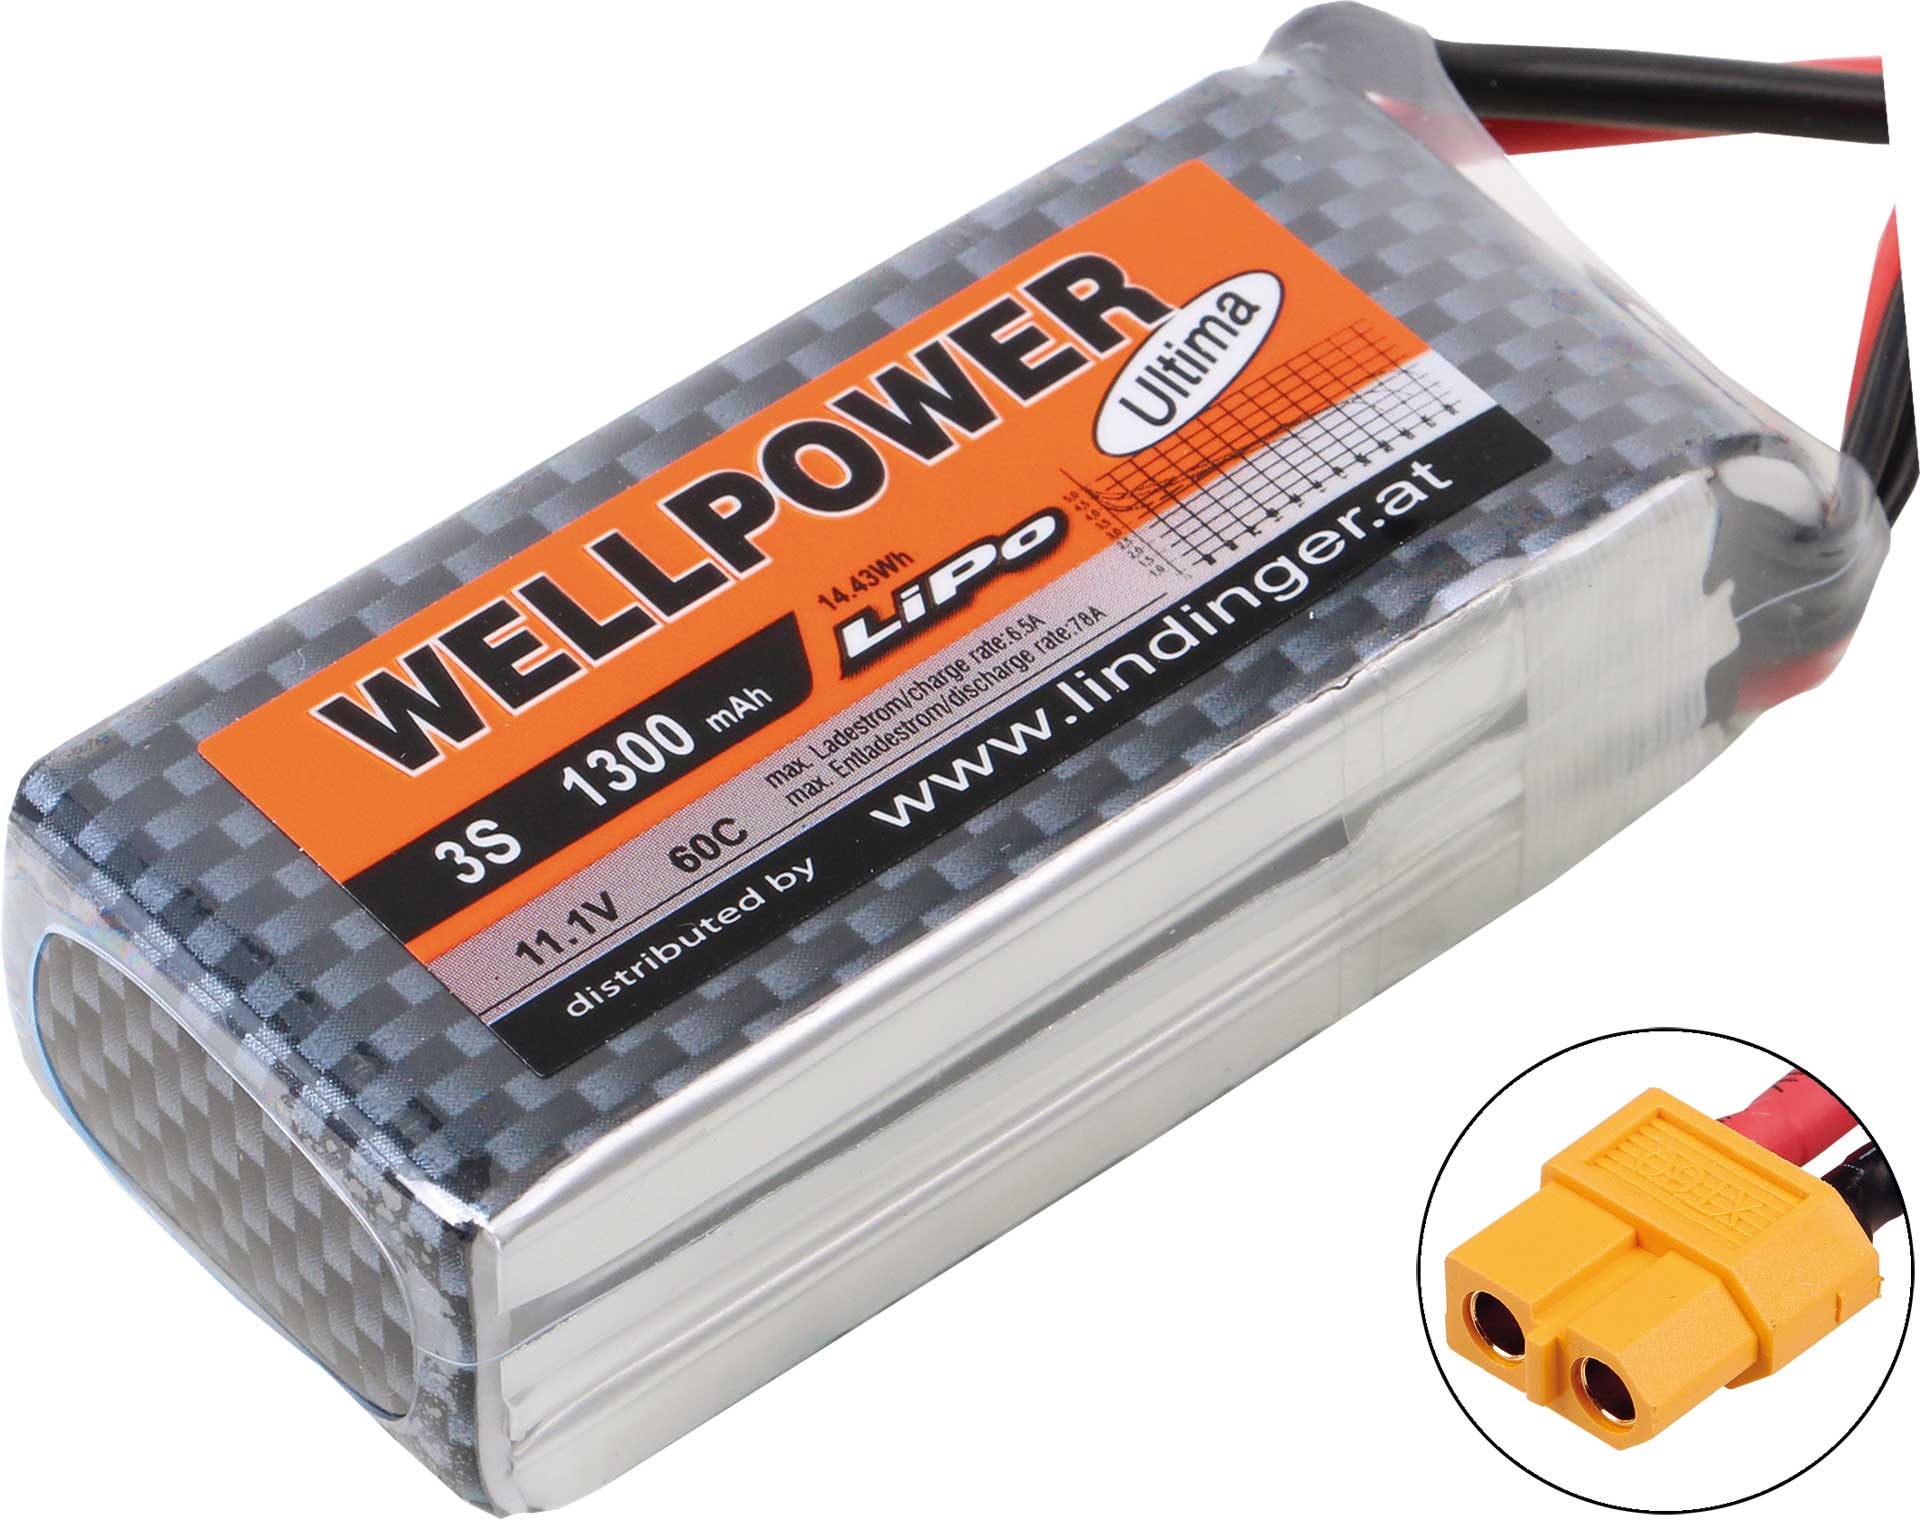 WELLPOWER LIPO BATTERY  PACK ULTIMA 1300 MAH / 11,1 VOLT 3S 60/120C CH5 WITH XT 60 PLUG SYSTEM